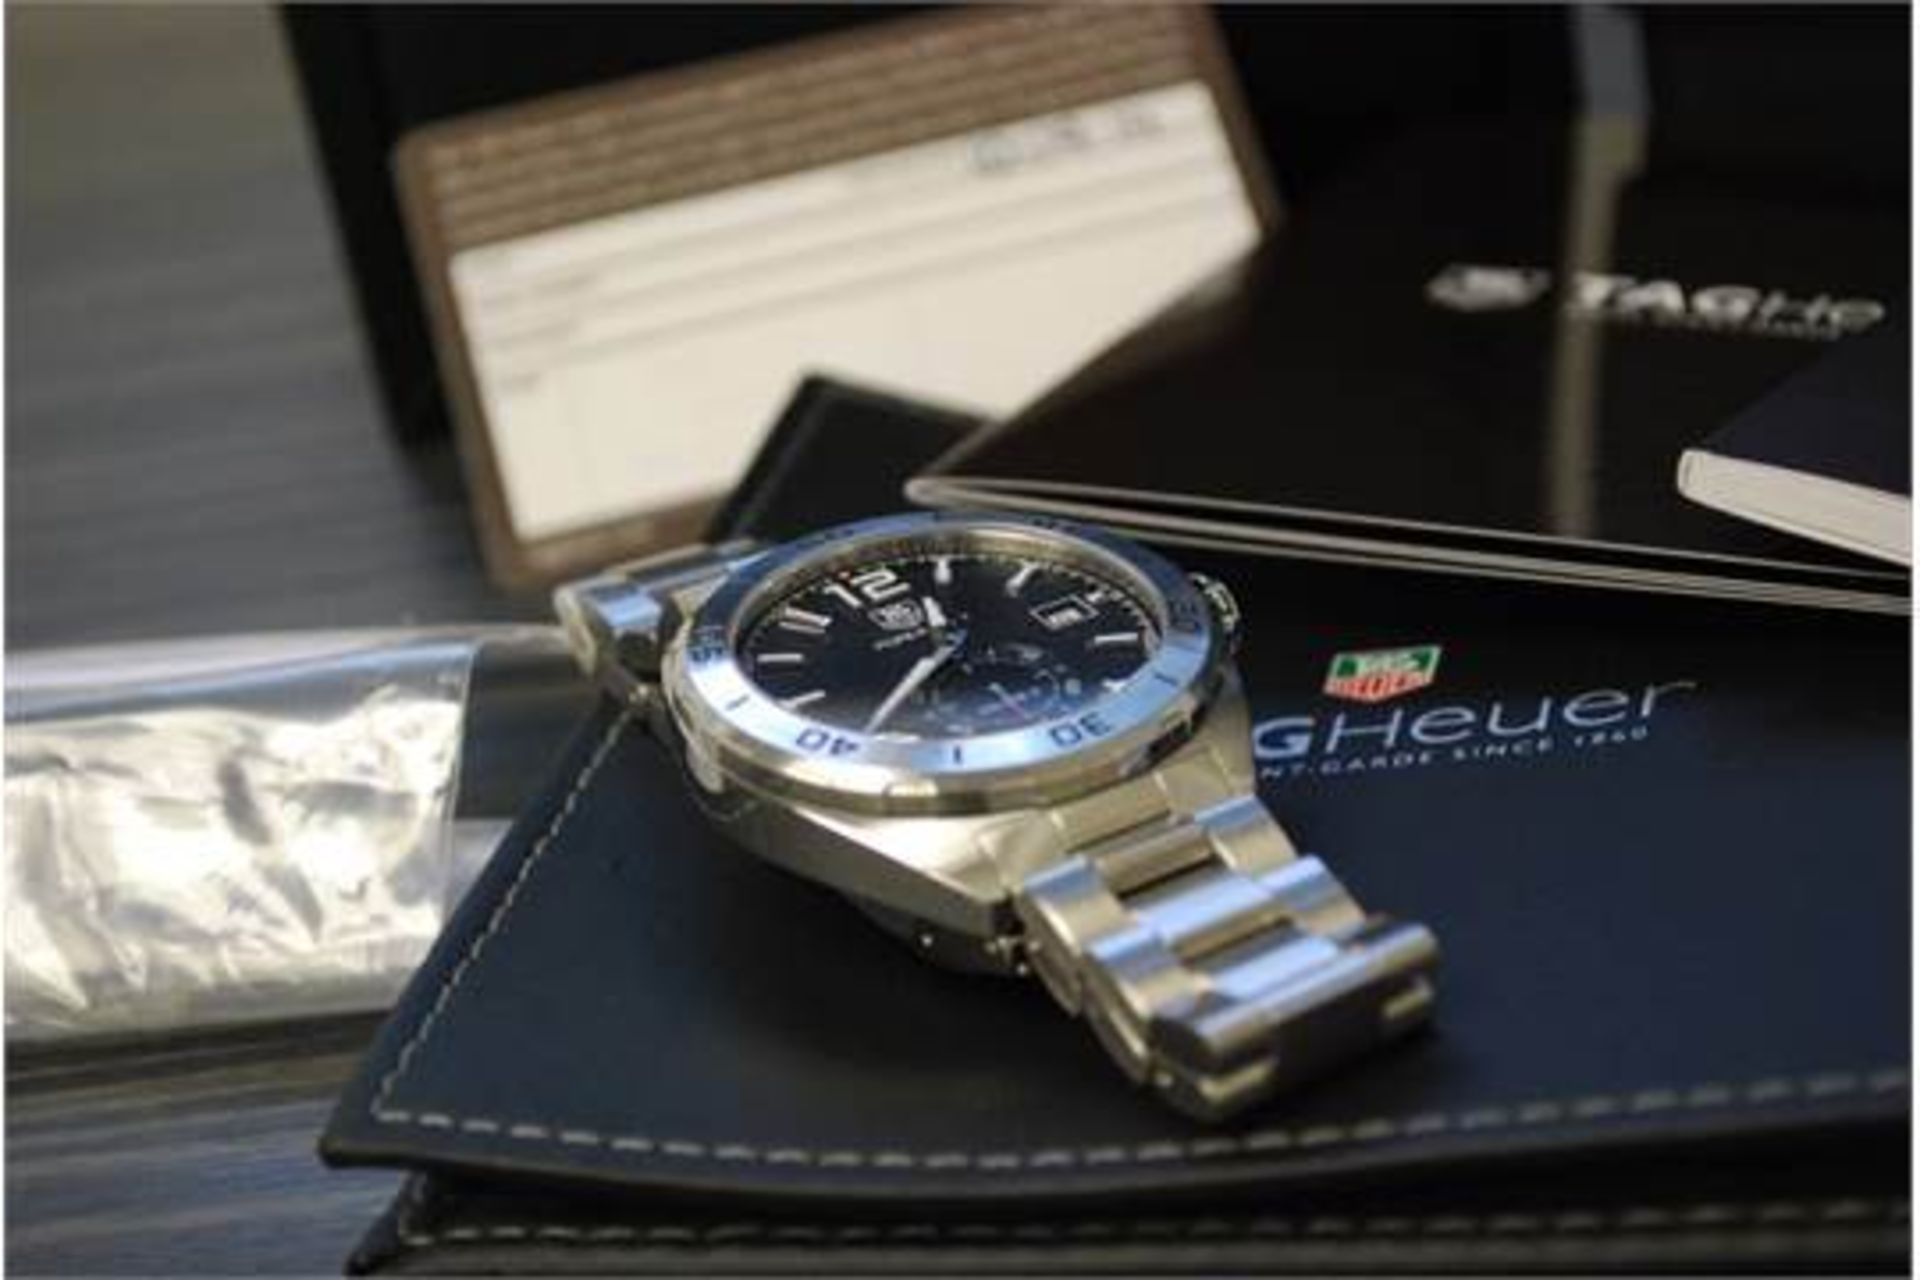 2014 Mens Tag Heuer F1 - Calibre 6 - Automatic Watch - Image 4 of 5